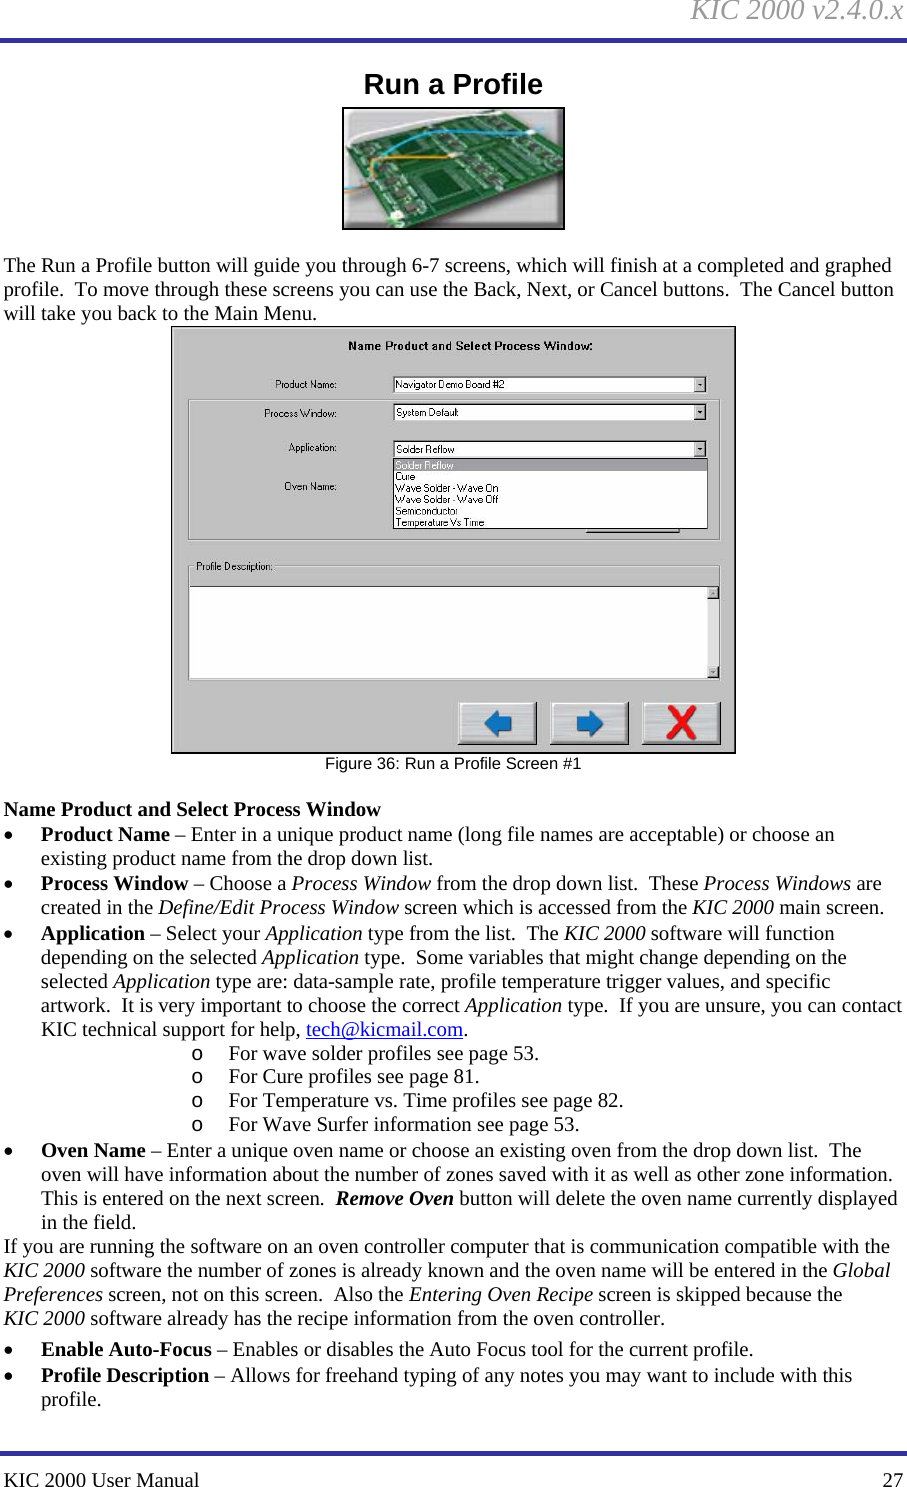 KIC 2000 v2.4.0.x KIC 2000 User Manual    27 Run a Profile   The Run a Profile button will guide you through 6-7 screens, which will finish at a completed and graphed profile.  To move through these screens you can use the Back, Next, or Cancel buttons.  The Cancel button will take you back to the Main Menu.  Figure 36: Run a Profile Screen #1  Name Product and Select Process Window • Product Name – Enter in a unique product name (long file names are acceptable) or choose an existing product name from the drop down list. • Process Window – Choose a Process Window from the drop down list.  These Process Windows are created in the Define/Edit Process Window screen which is accessed from the KIC 2000 main screen. • Application – Select your Application type from the list.  The KIC 2000 software will function depending on the selected Application type.  Some variables that might change depending on the selected Application type are: data-sample rate, profile temperature trigger values, and specific artwork.  It is very important to choose the correct Application type.  If you are unsure, you can contact KIC technical support for help, tech@kicmail.com. o For wave solder profiles see page 53. o For Cure profiles see page 81. o For Temperature vs. Time profiles see page 82. o For Wave Surfer information see page 53. • Oven Name – Enter a unique oven name or choose an existing oven from the drop down list.  The oven will have information about the number of zones saved with it as well as other zone information.  This is entered on the next screen.  Remove Oven button will delete the oven name currently displayed in the field. If you are running the software on an oven controller computer that is communication compatible with the KIC 2000 software the number of zones is already known and the oven name will be entered in the Global Preferences screen, not on this screen.  Also the Entering Oven Recipe screen is skipped because the KIC 2000 software already has the recipe information from the oven controller. • Enable Auto-Focus – Enables or disables the Auto Focus tool for the current profile. • Profile Description – Allows for freehand typing of any notes you may want to include with this profile. 